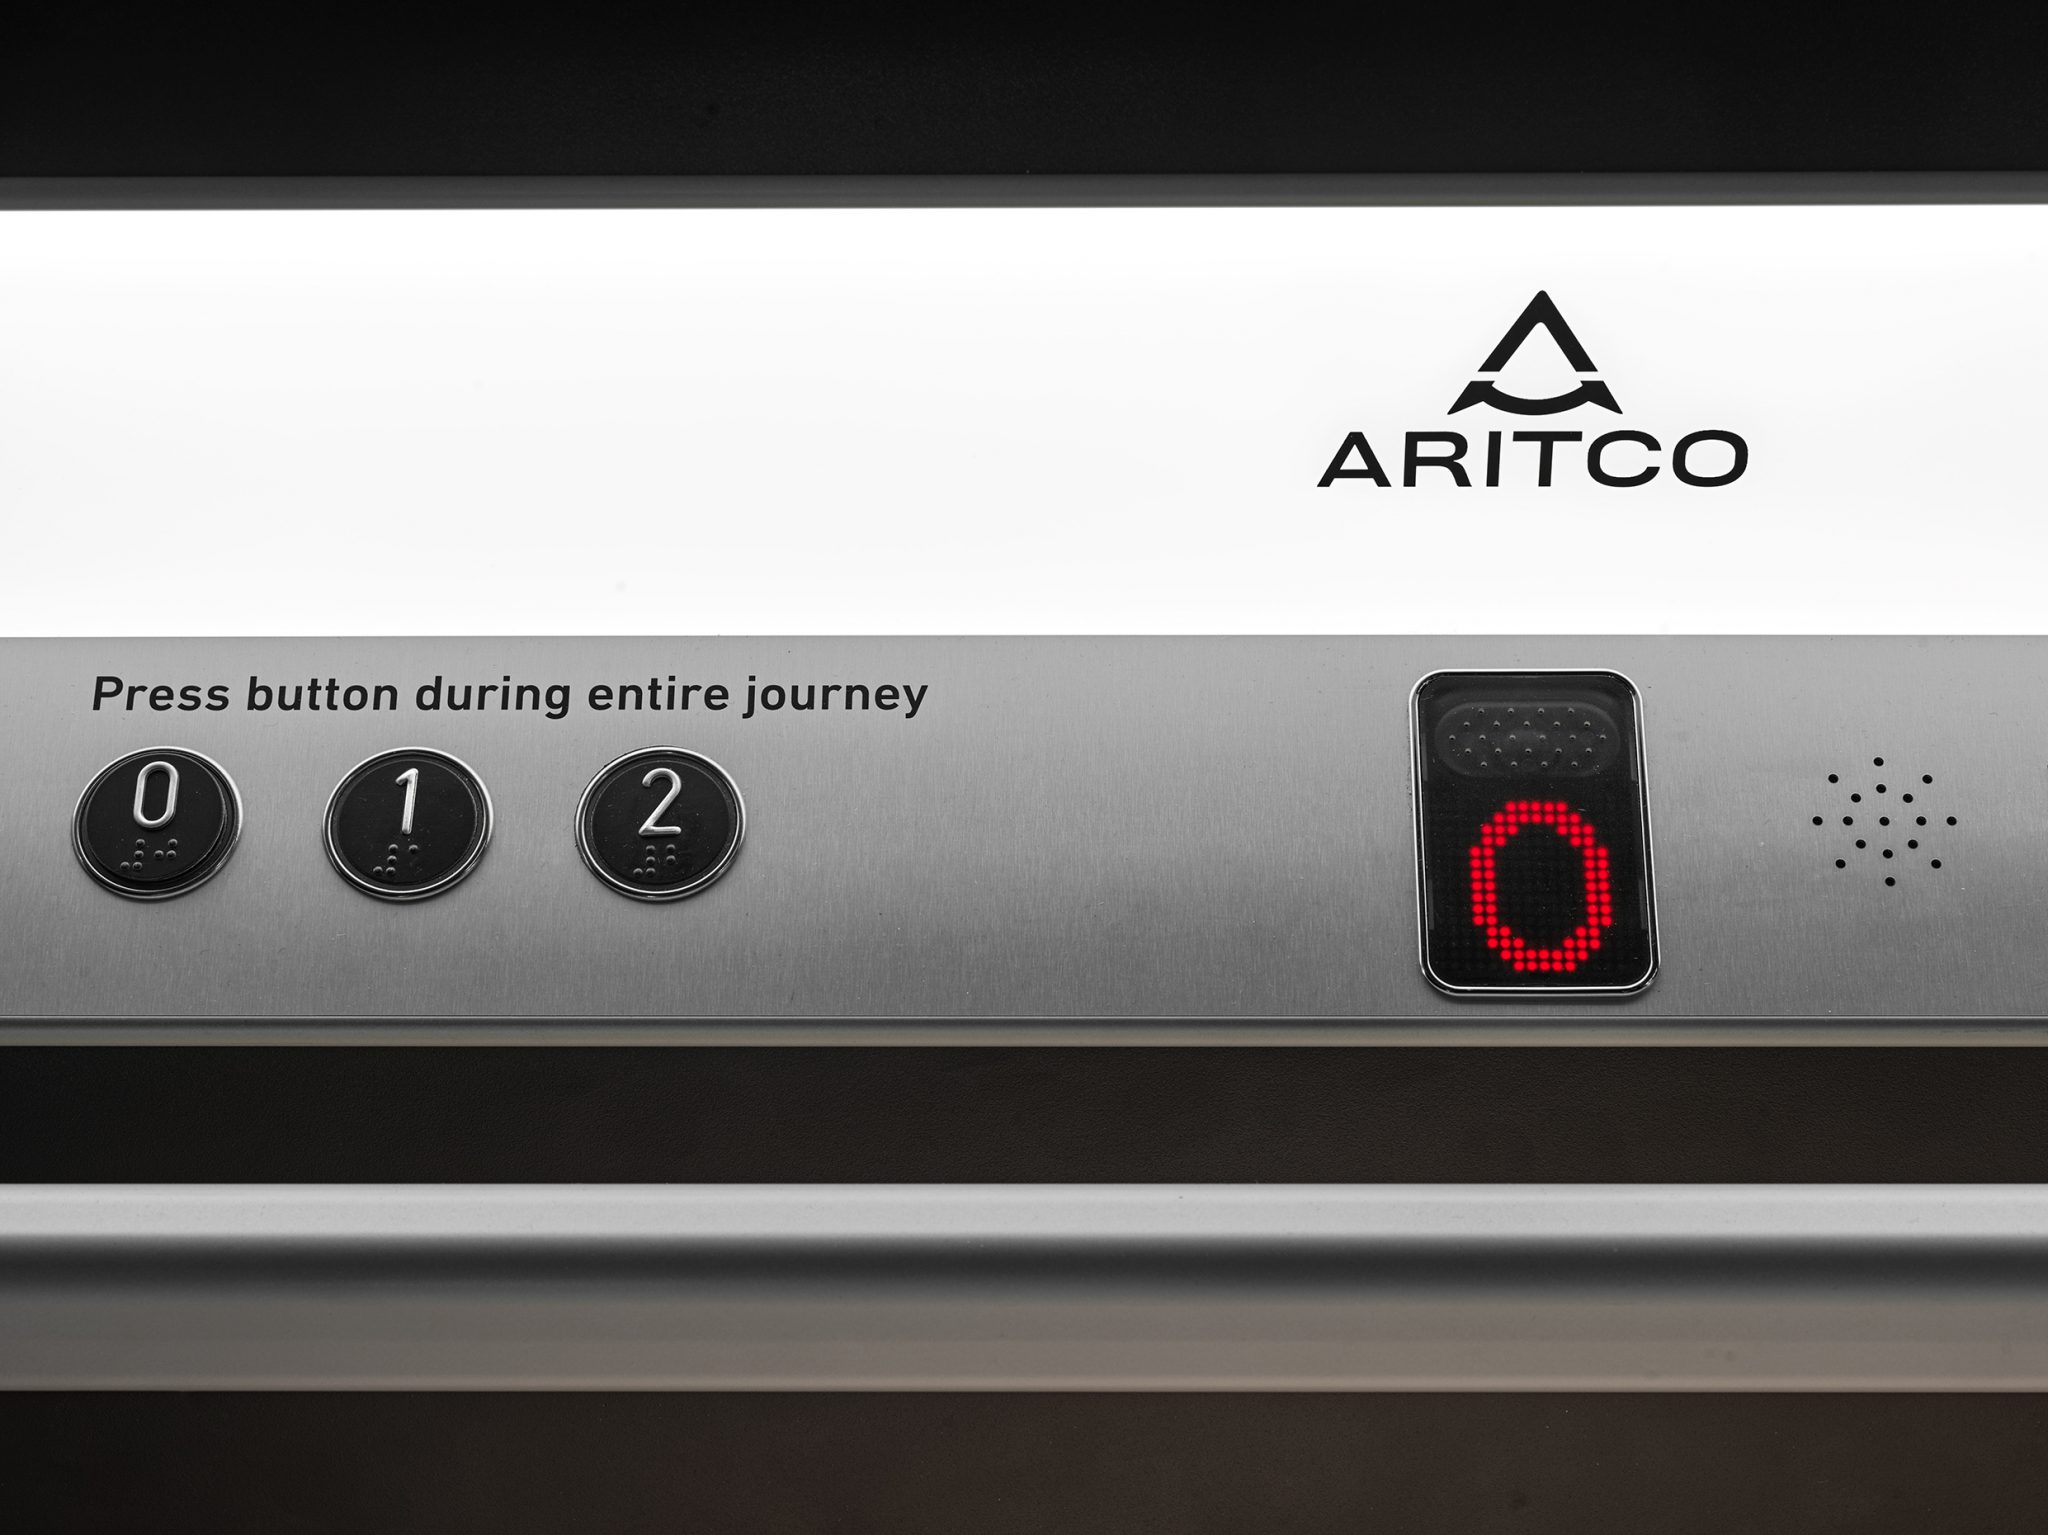 lose up at the panel of Aritco PublicLift_Access